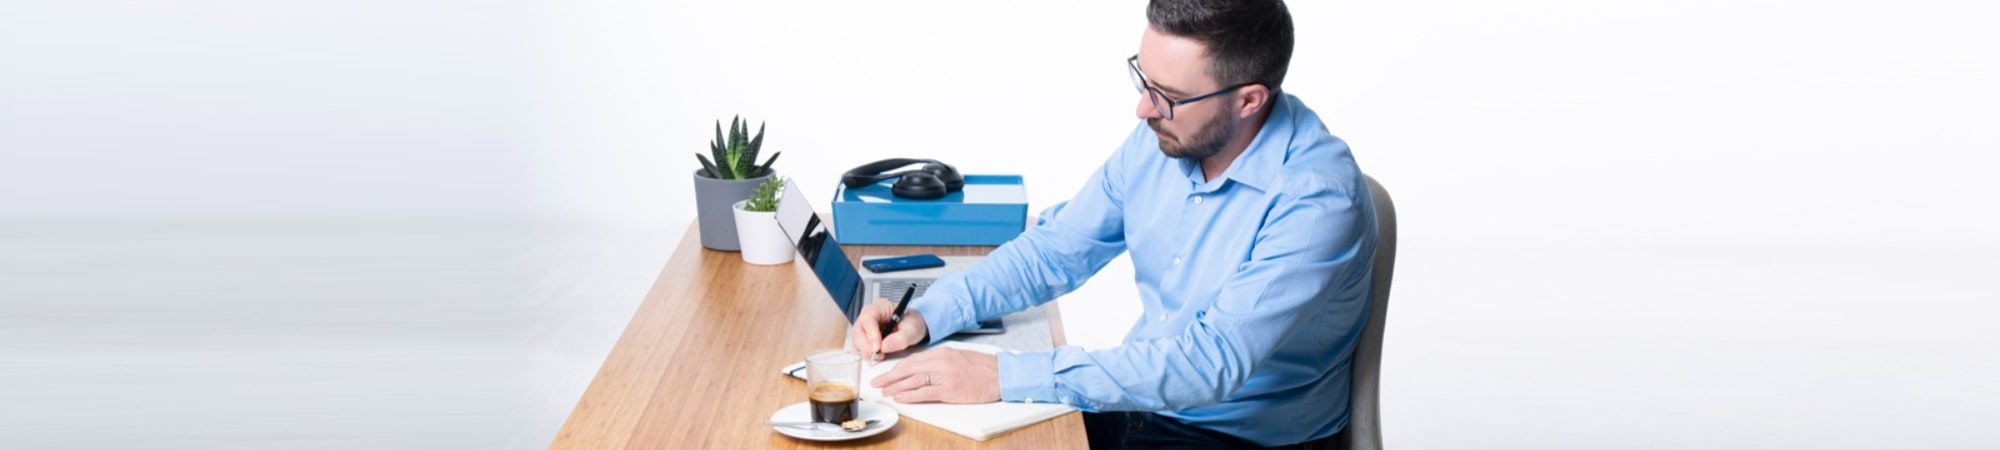 Recruiter writing notes at a desk 